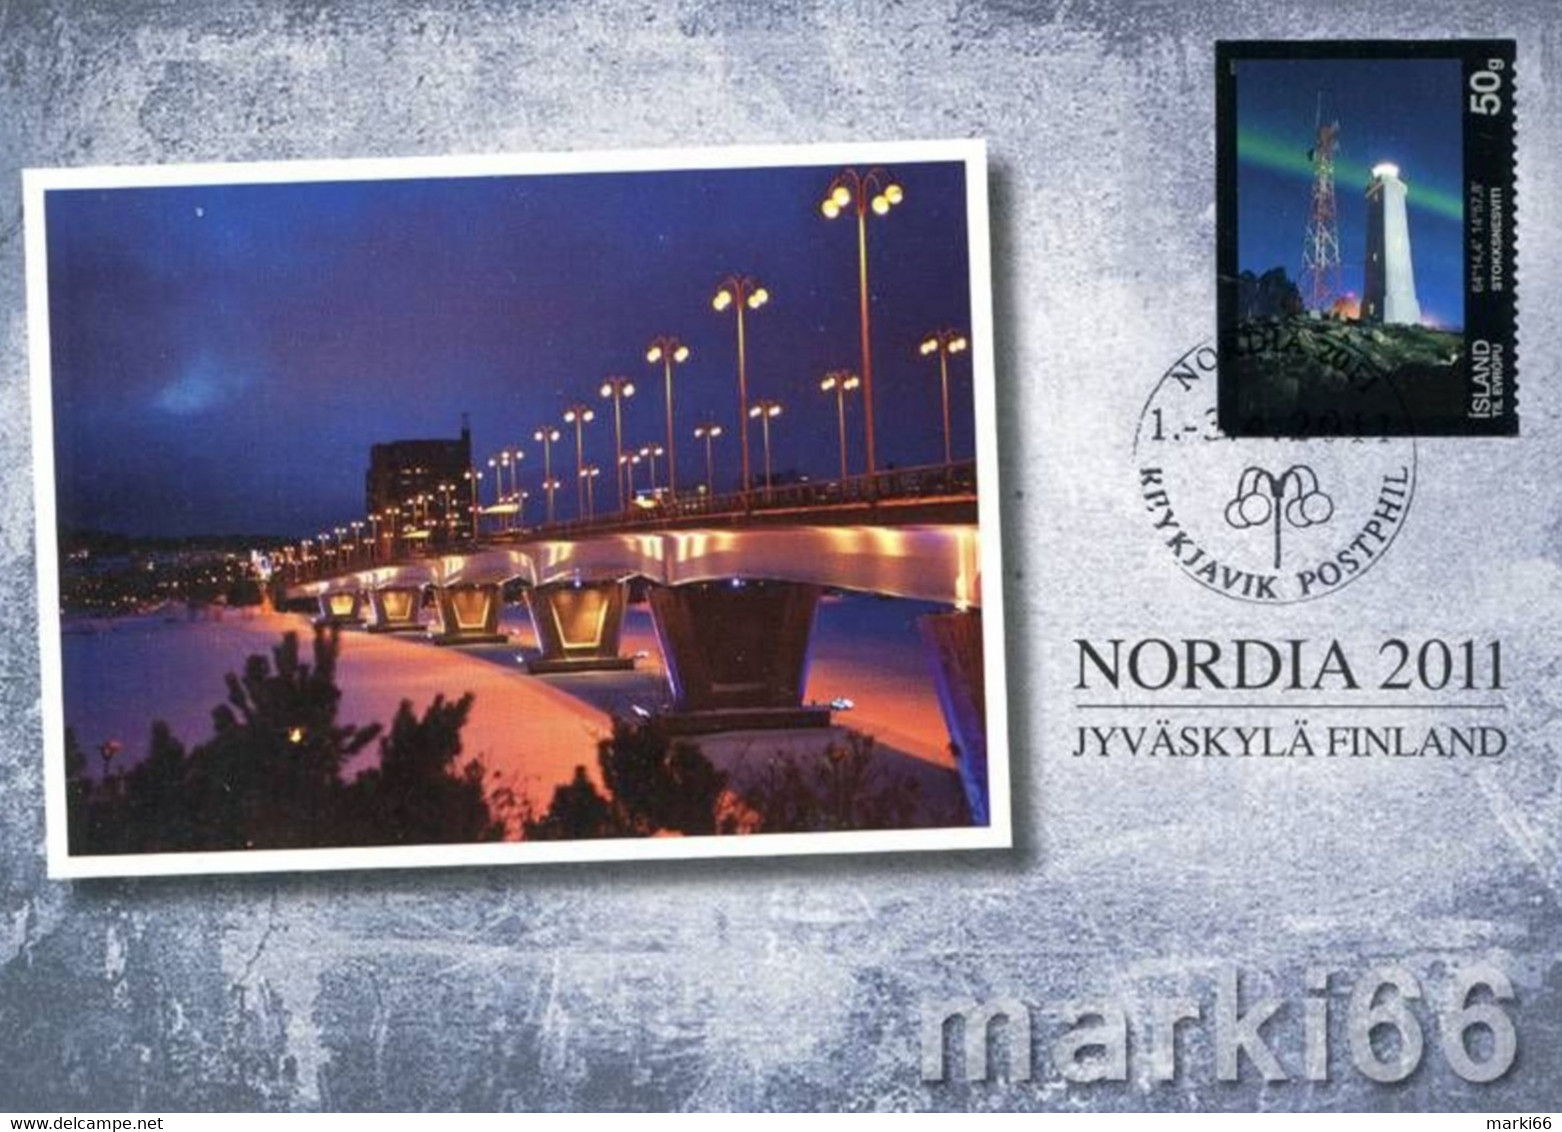 Iceland - 2011 - Exhibition Card - NORDIA 2011, Finland - Official Postcard With Stamp And Special Postmark - Maximumkaarten